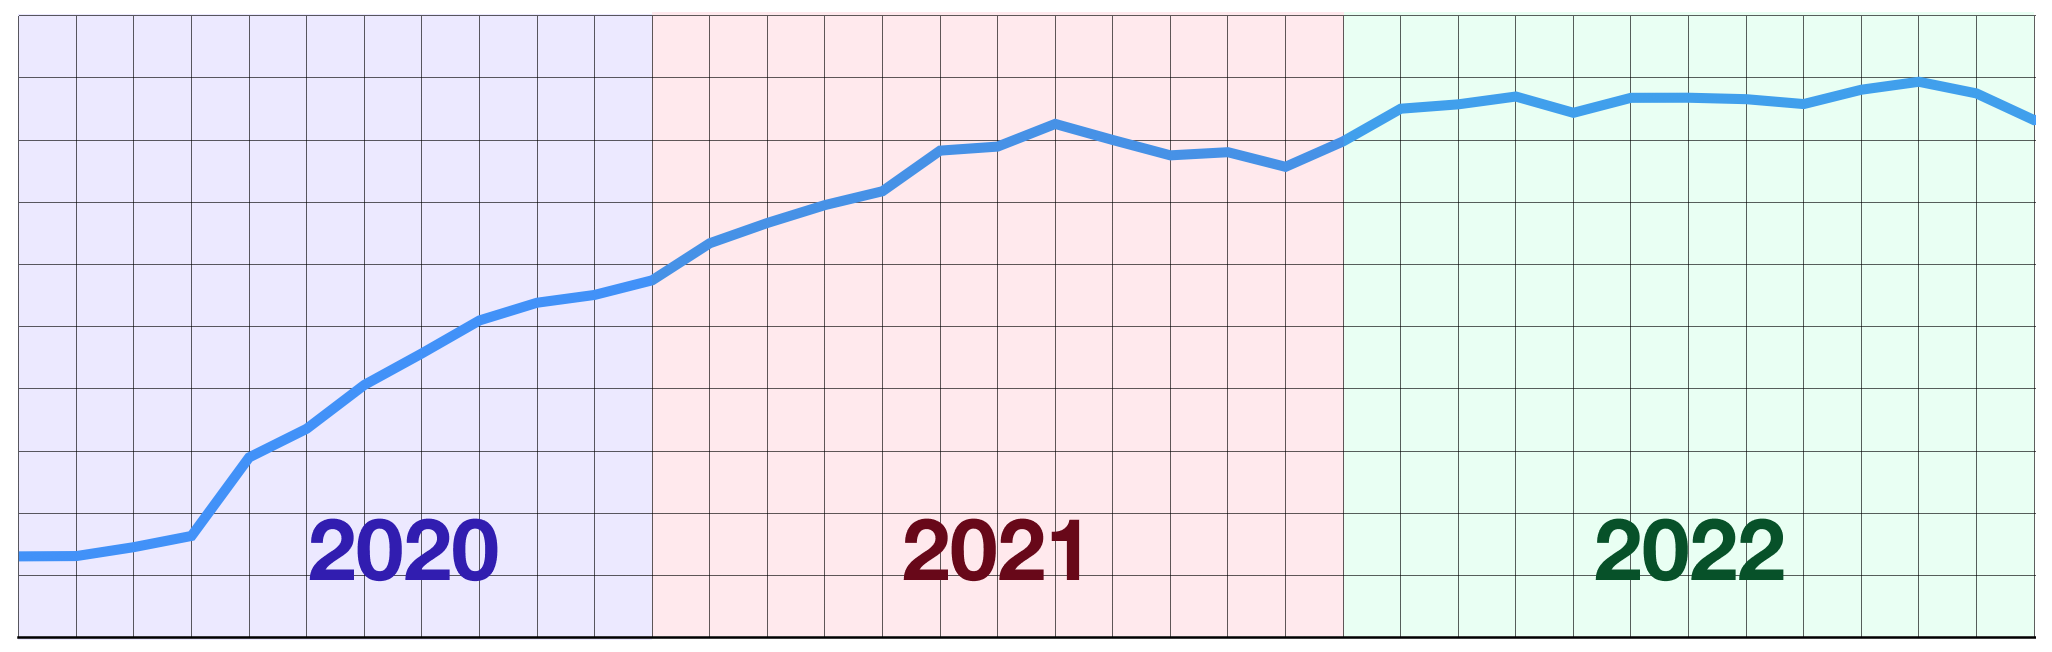 A plot of my revenue, rising steeply in 2020 and the first half of 2021, then plateauing through 2022